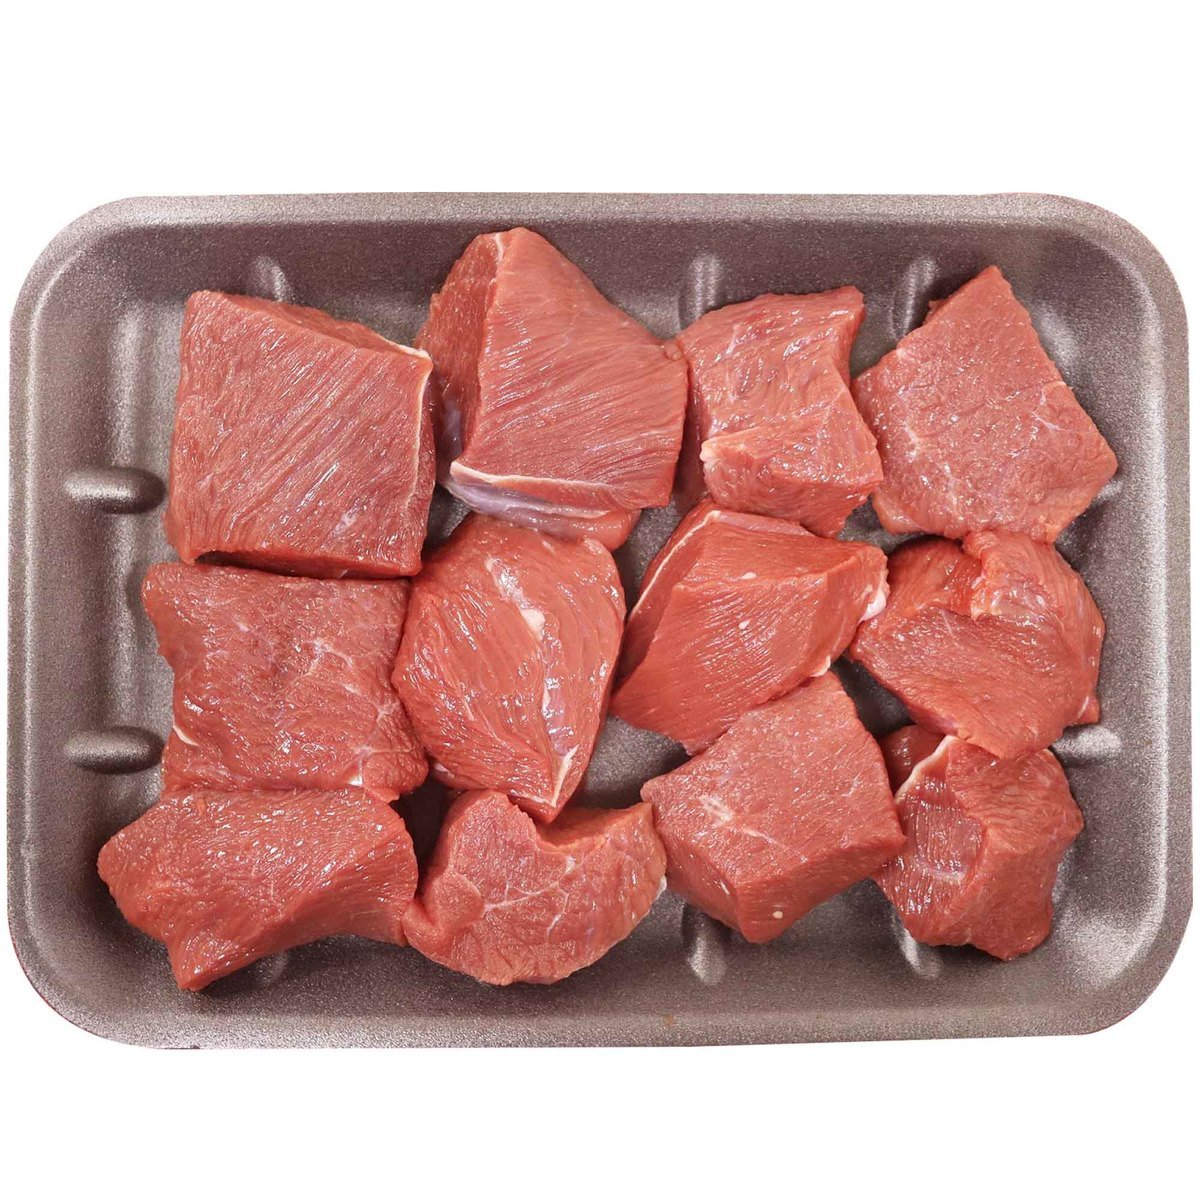 Locally Slaughtered Somali Beef Cubes 500 g